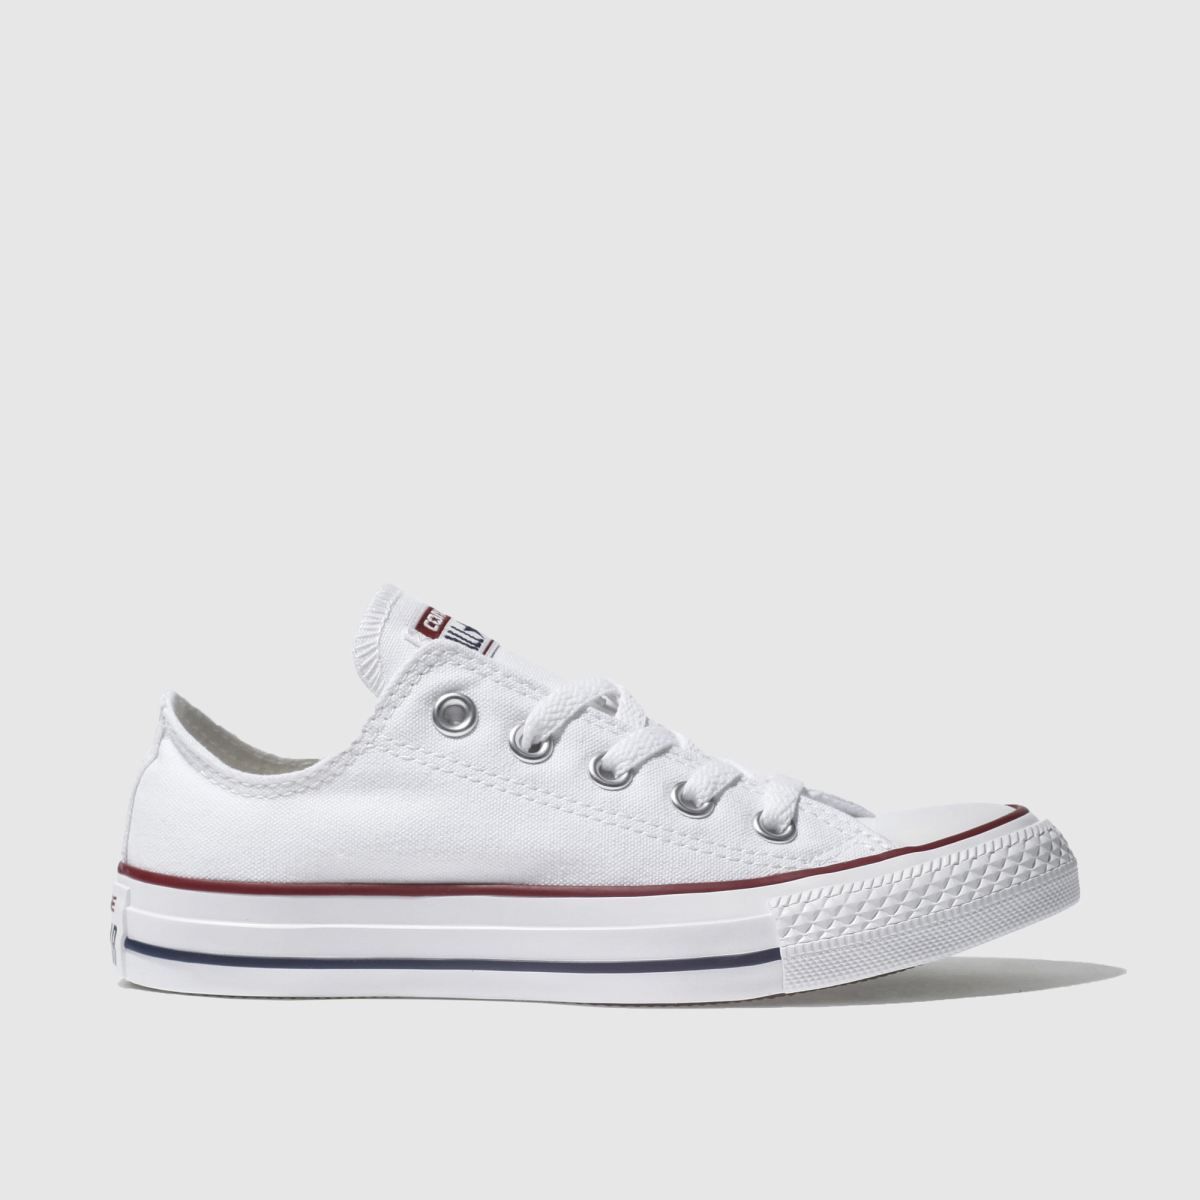 Converse white all star oxford trainers | Schuh